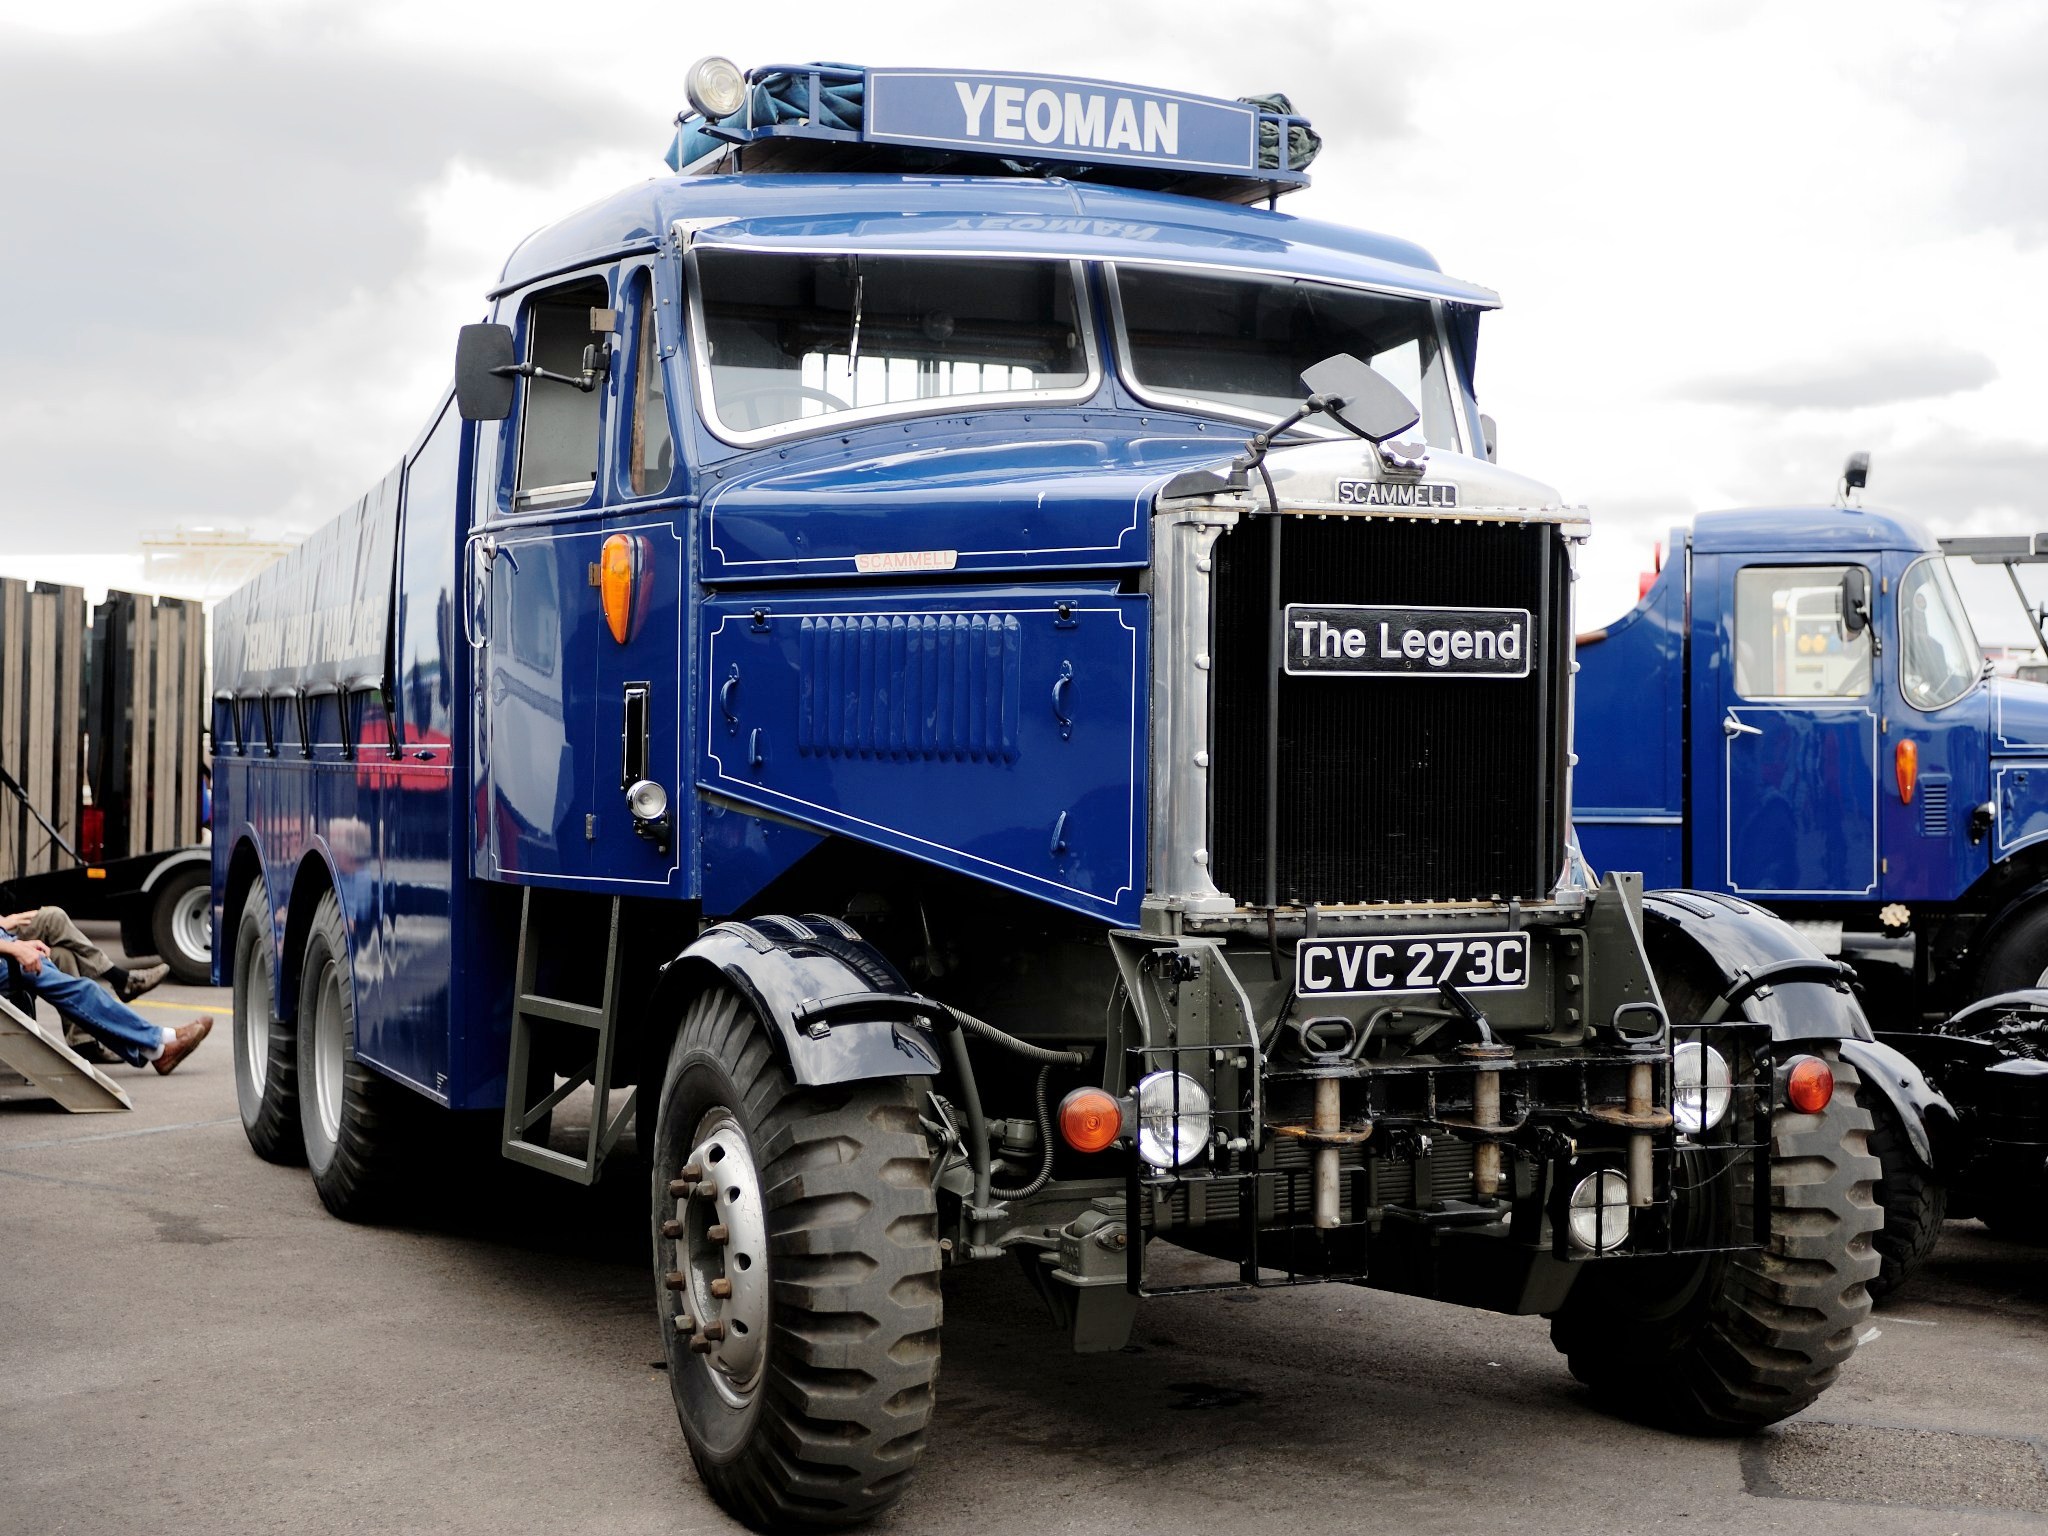 Scammell Wallpapers